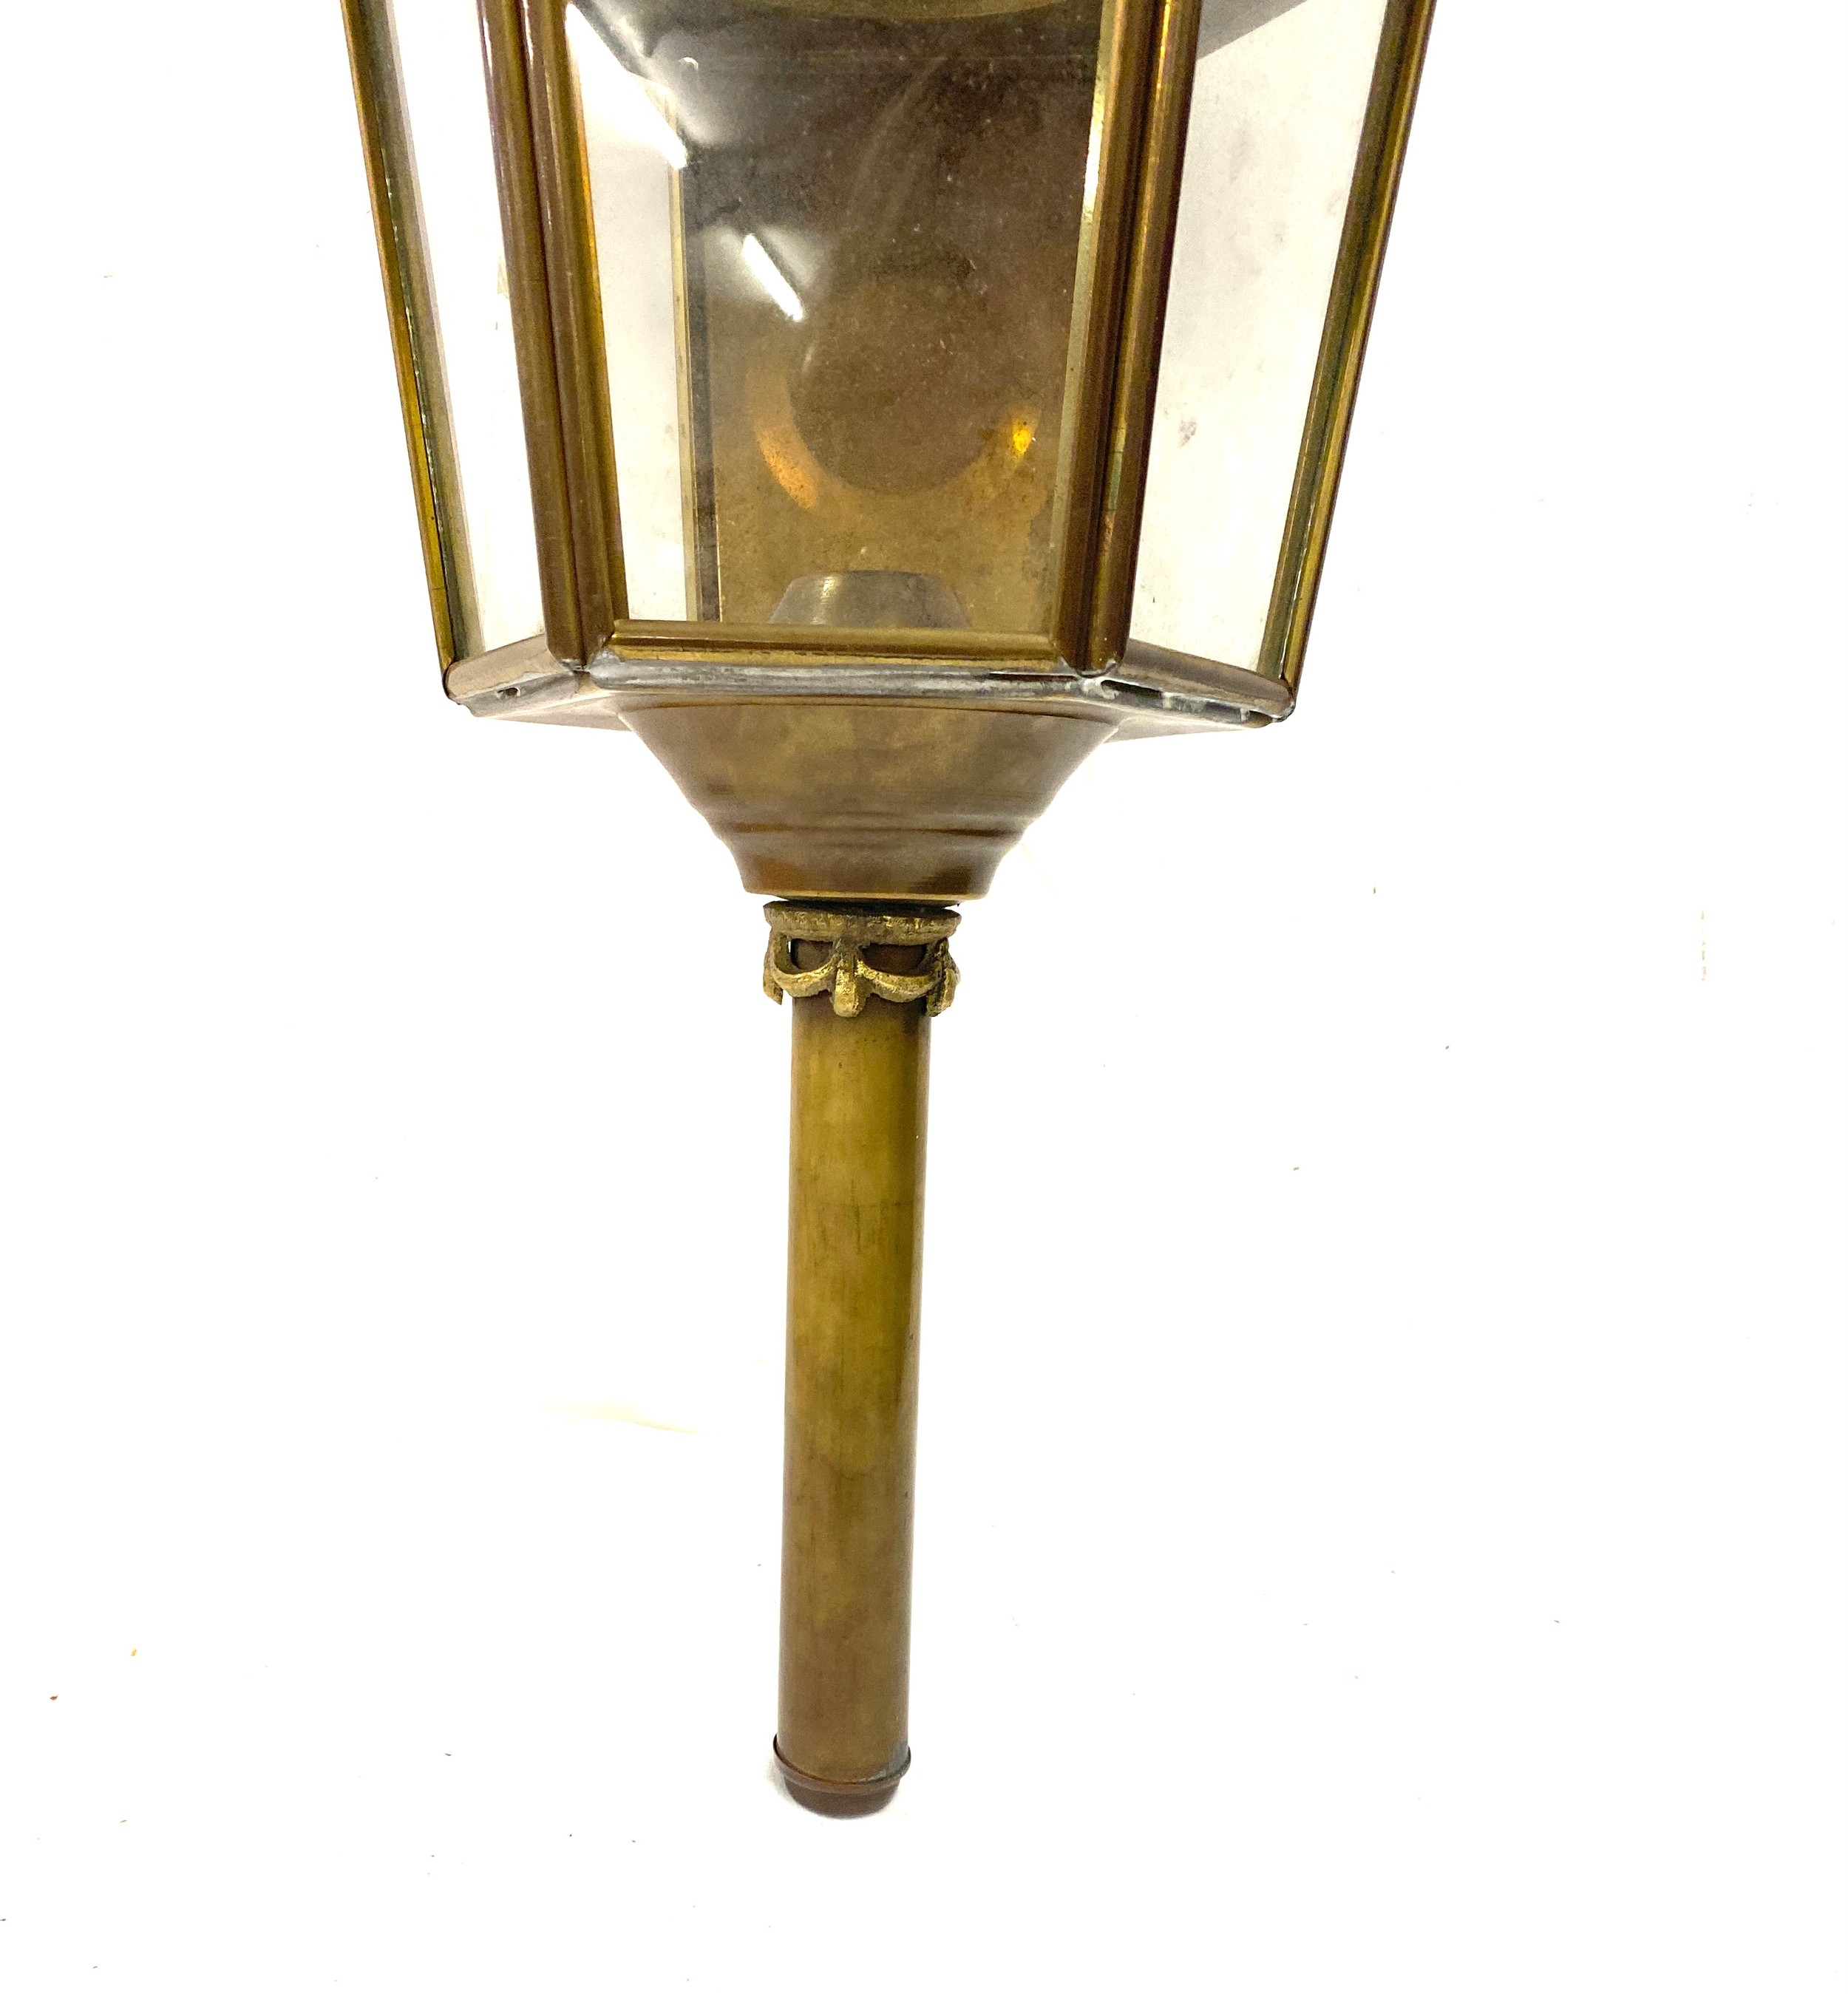 Vintage brass outdoor carriage light, height 26 inches - Image 5 of 6